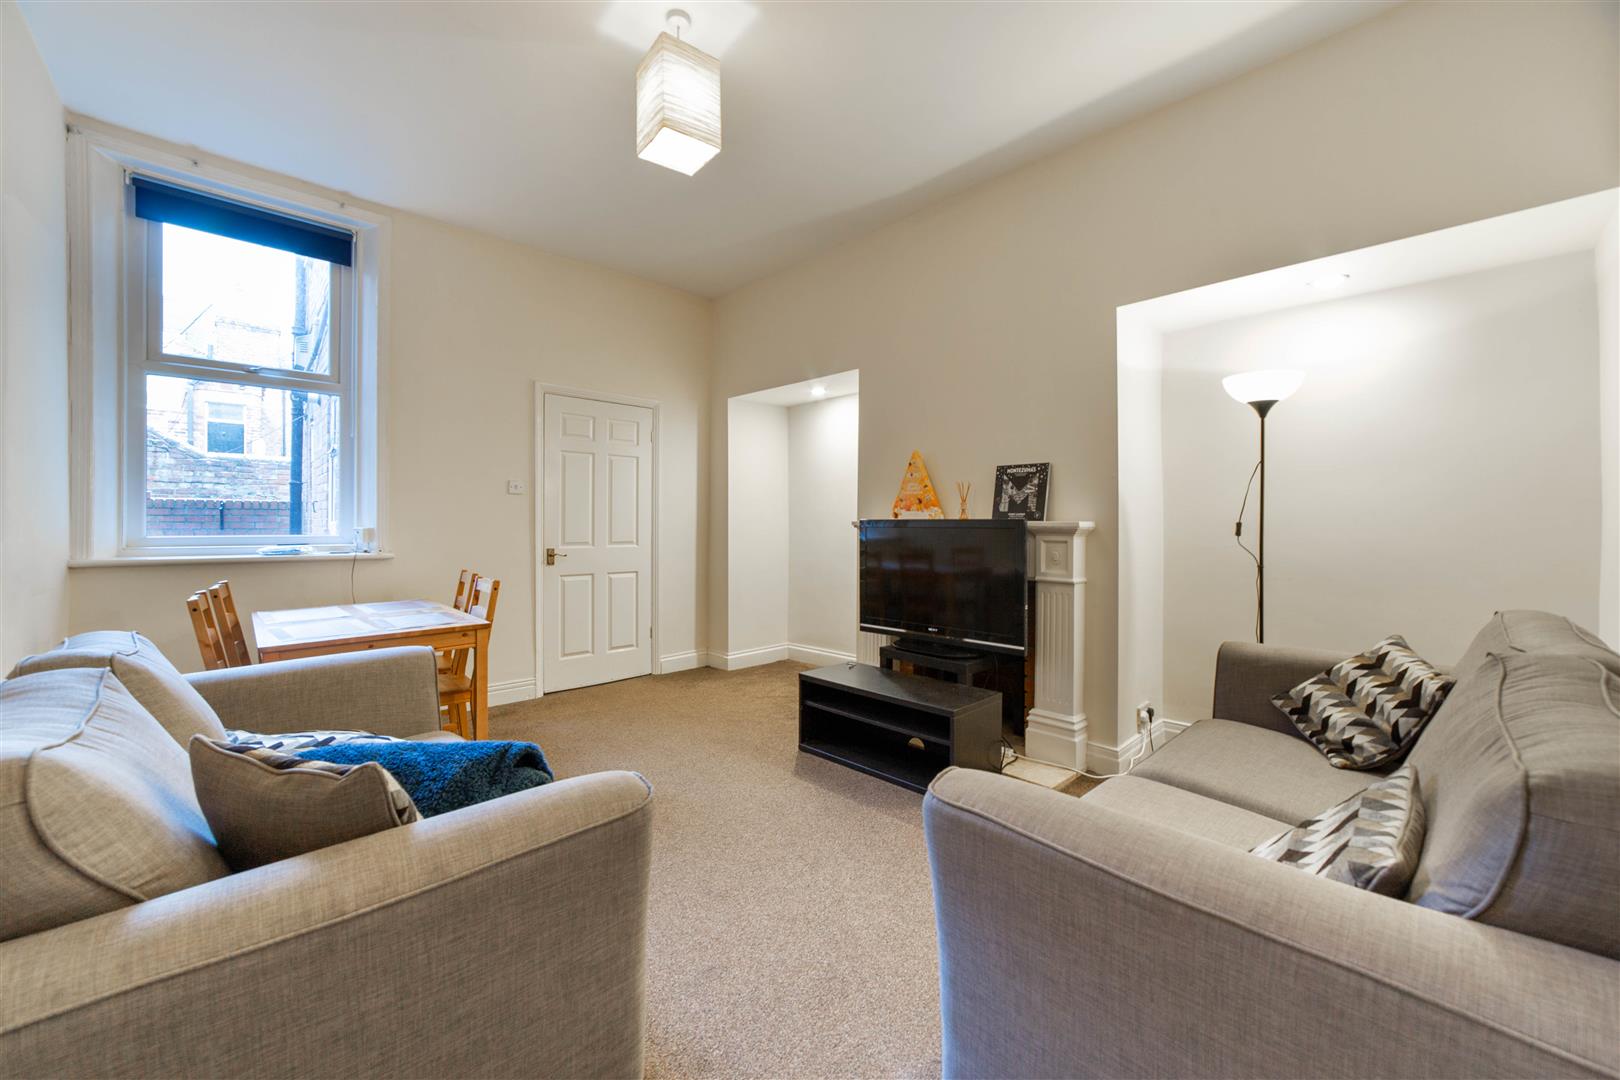 2 bed flat to rent in Ashleigh Grove, Jesmond - Property Image 1